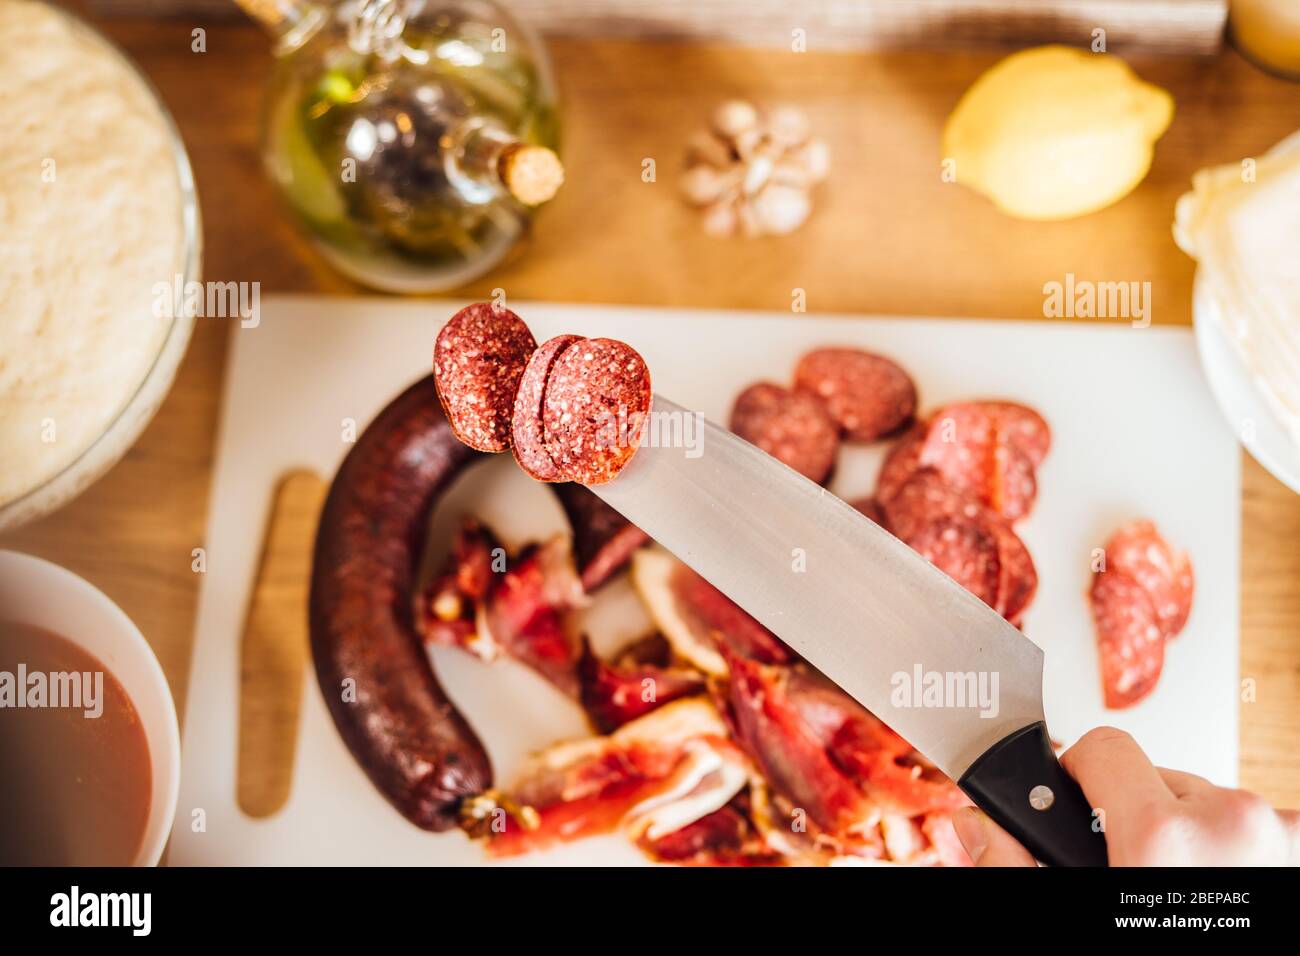 Homemade dry cured smoked spicy sausage.Delicatessen meats. Charcuterie board assembly.Meat/protein snack.Pepperoni pizza topping.Thin slices of sausa Stock Photo